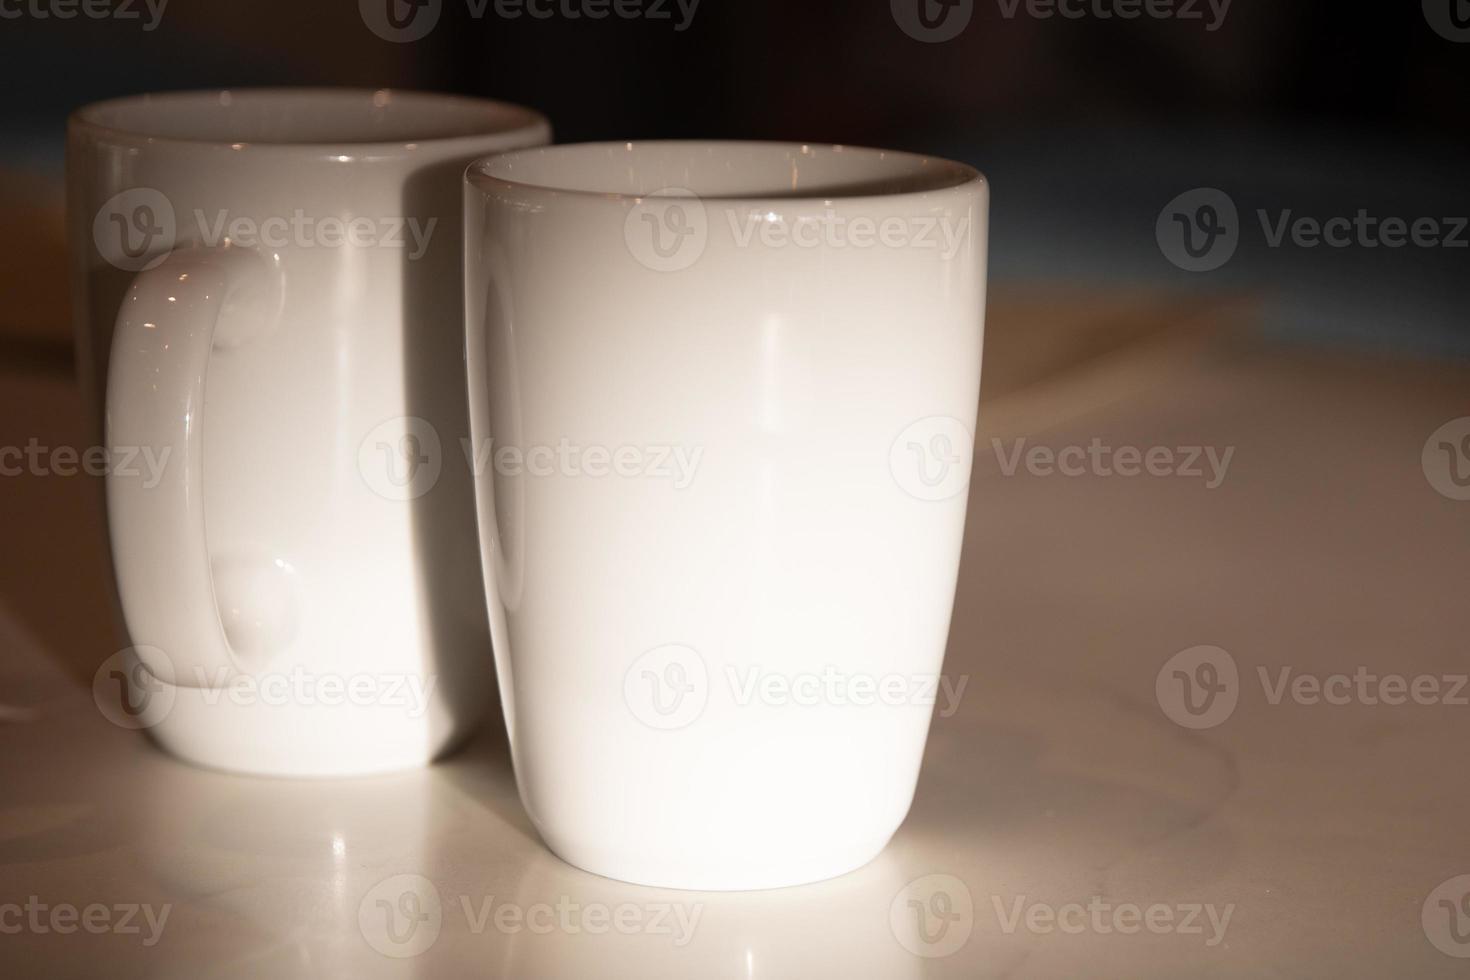 Two blank coffee mugs 21839548 Stock Photo at Vecteezy